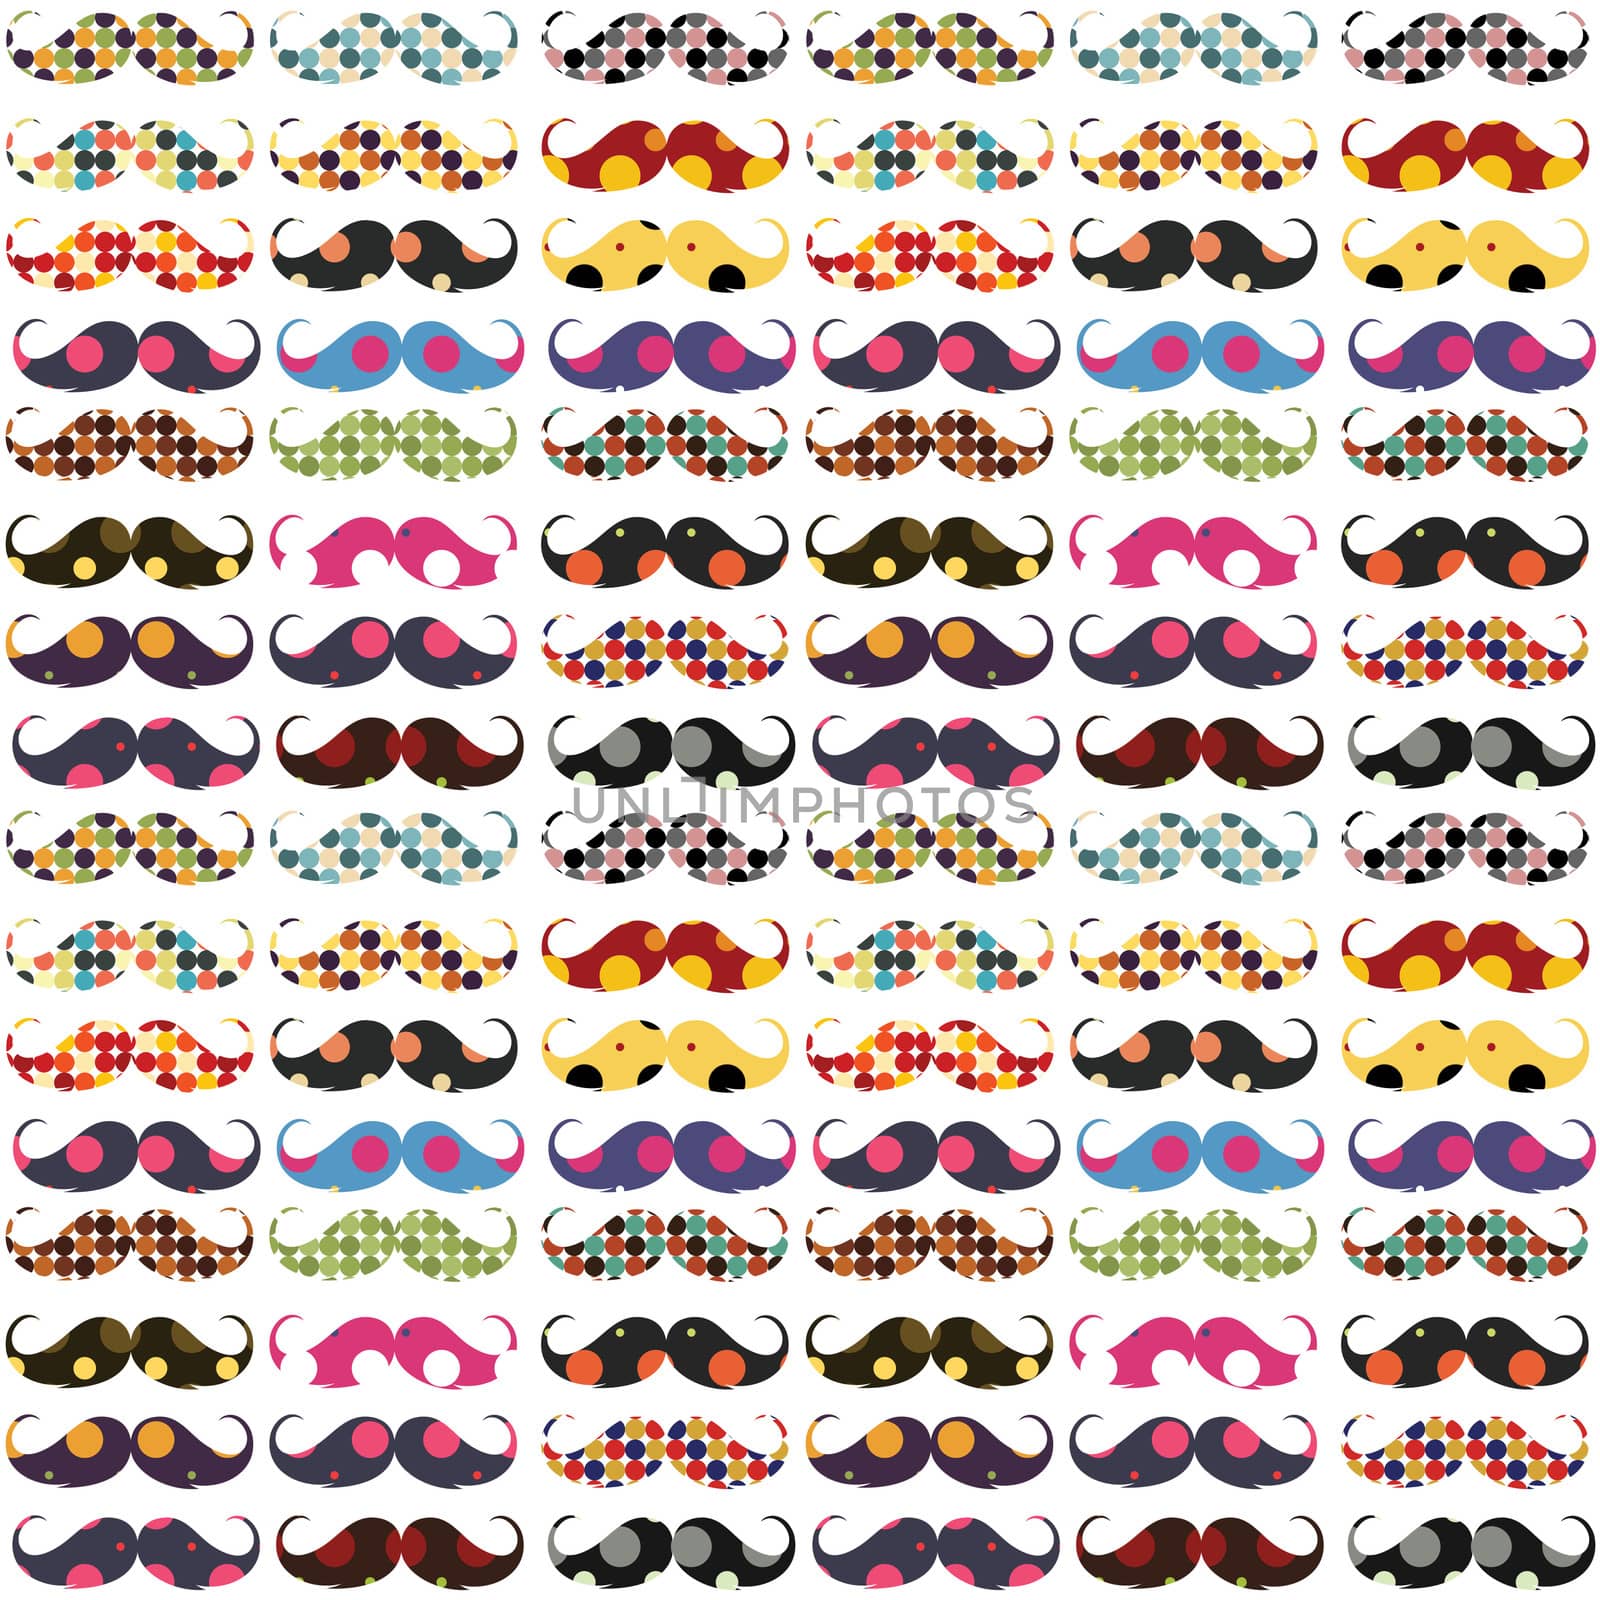 Mustaches pattern with polka dots